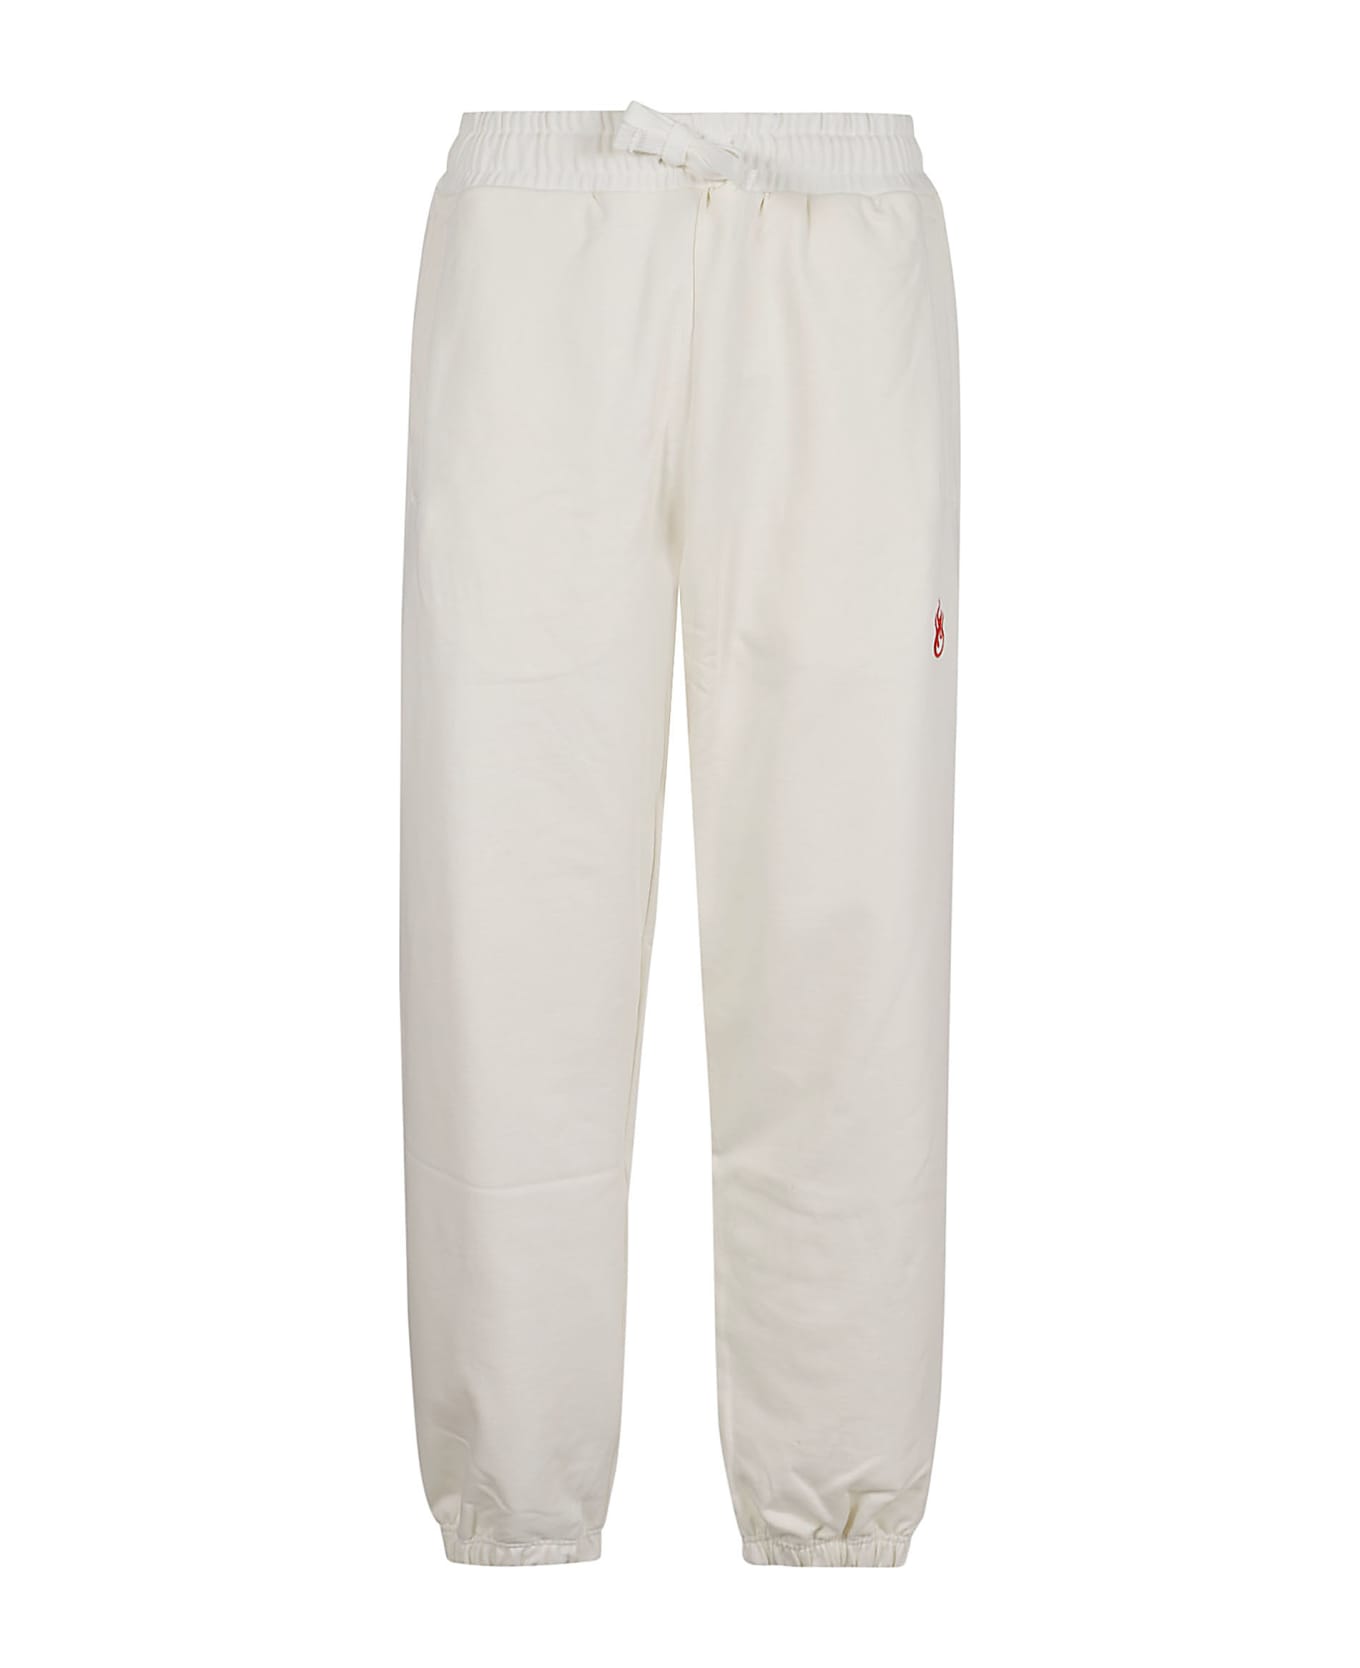 Vision of Super White Pants With Flames Logo And Metal Label